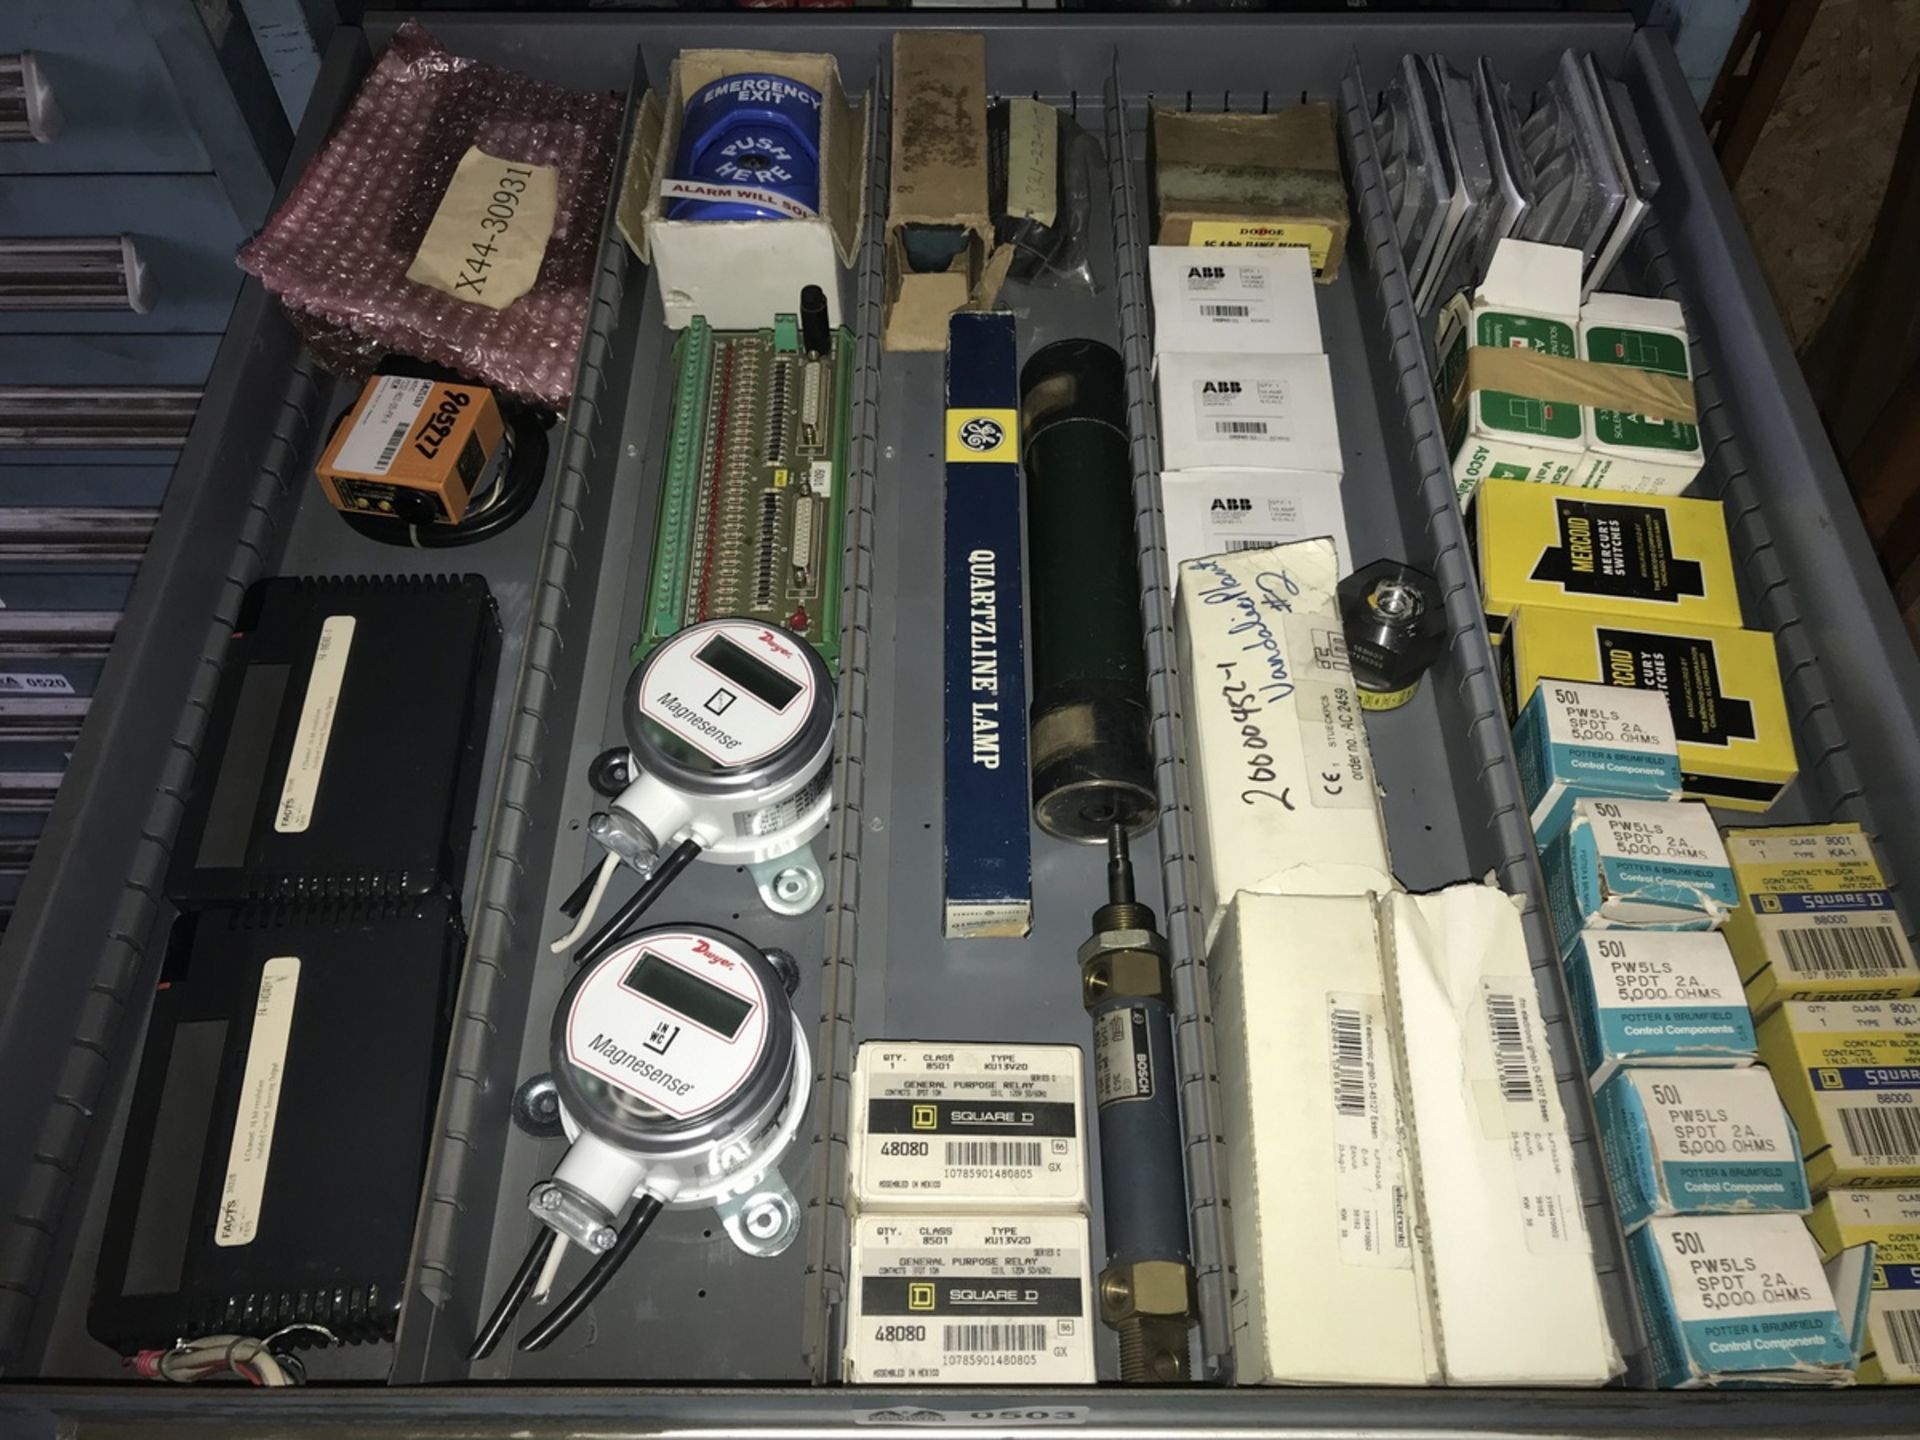 Contents of Drawer including Asco valves, ABB switches, Dwyer sensors, output modules, etc.